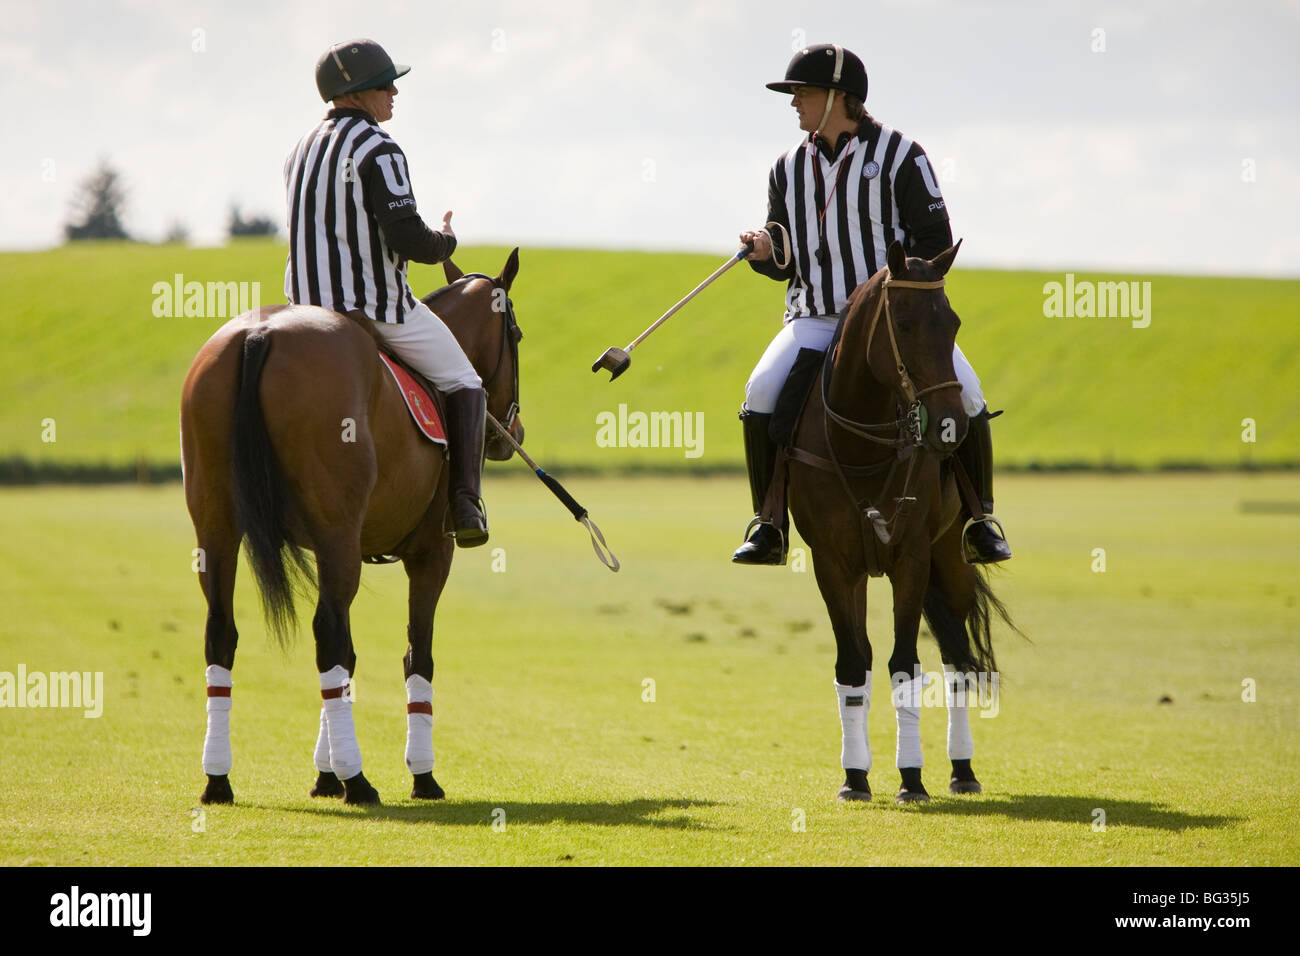 Two polo umpires chat during a break in play, Cowdray Park, West Sussex, England. Stock Photo